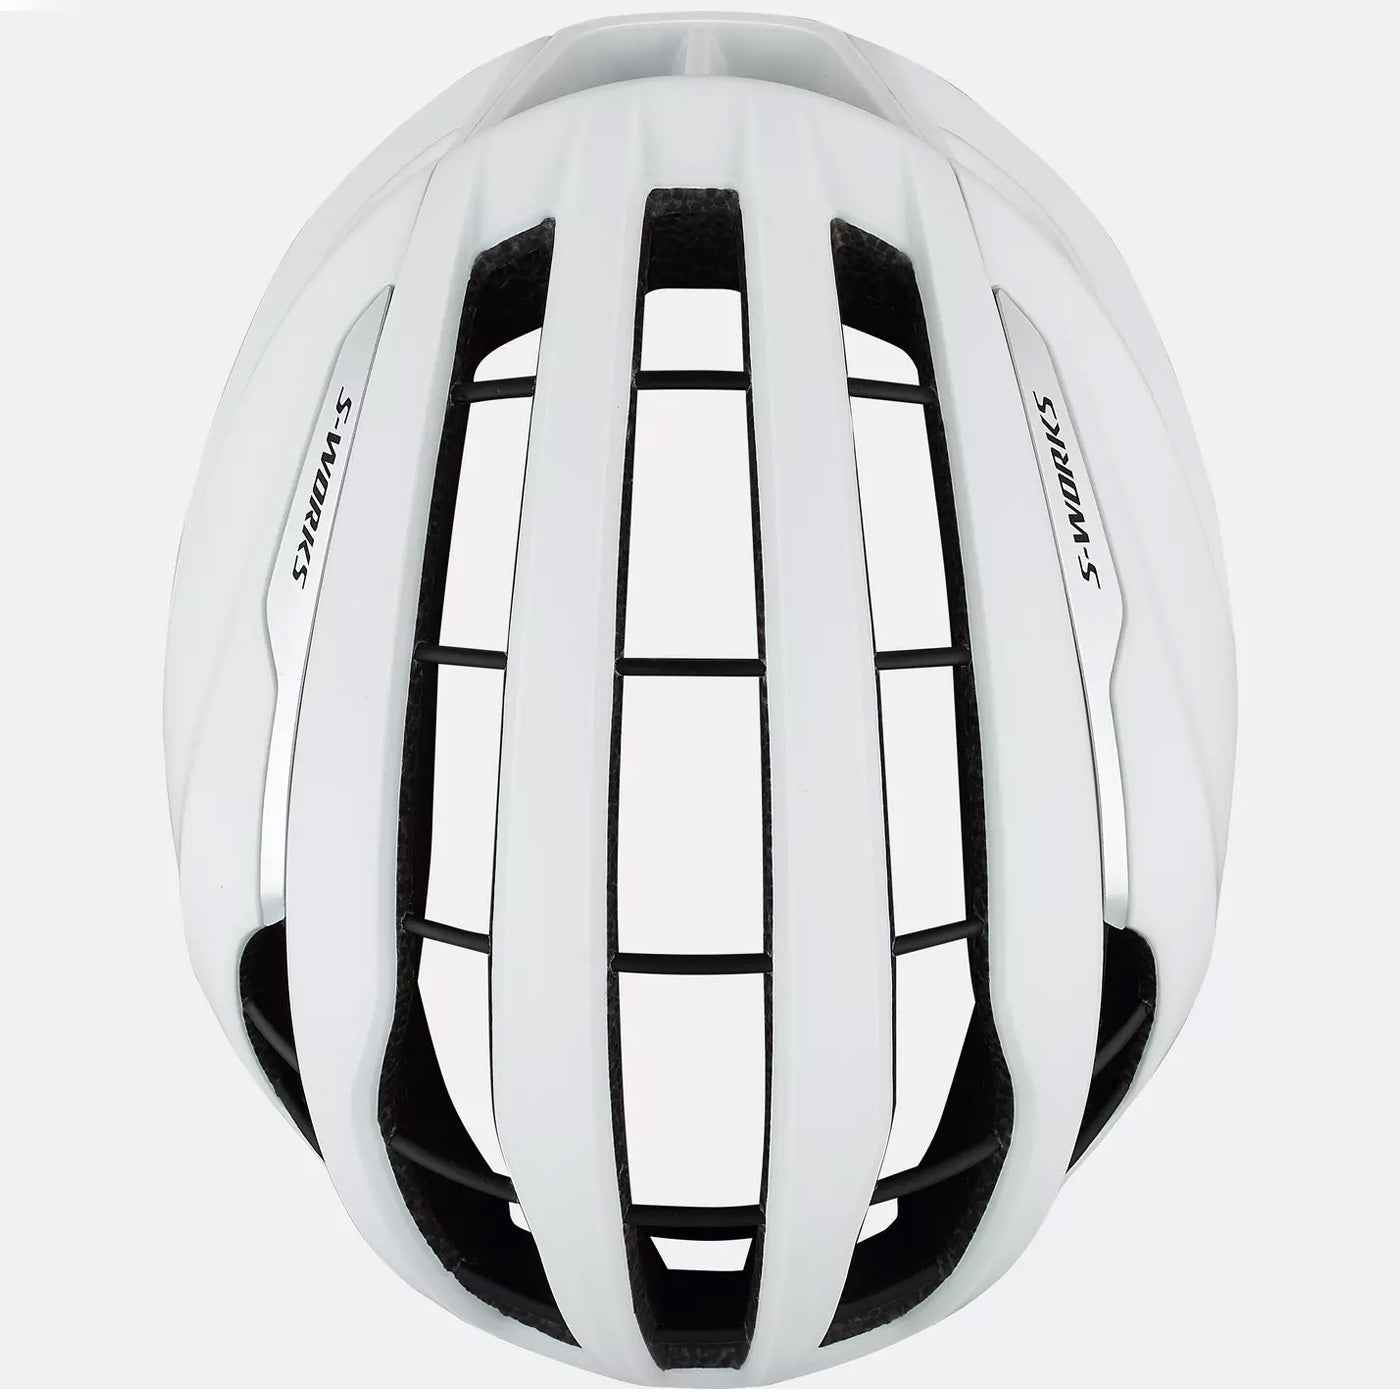 Specialized Prevail 3 helm - Weiss